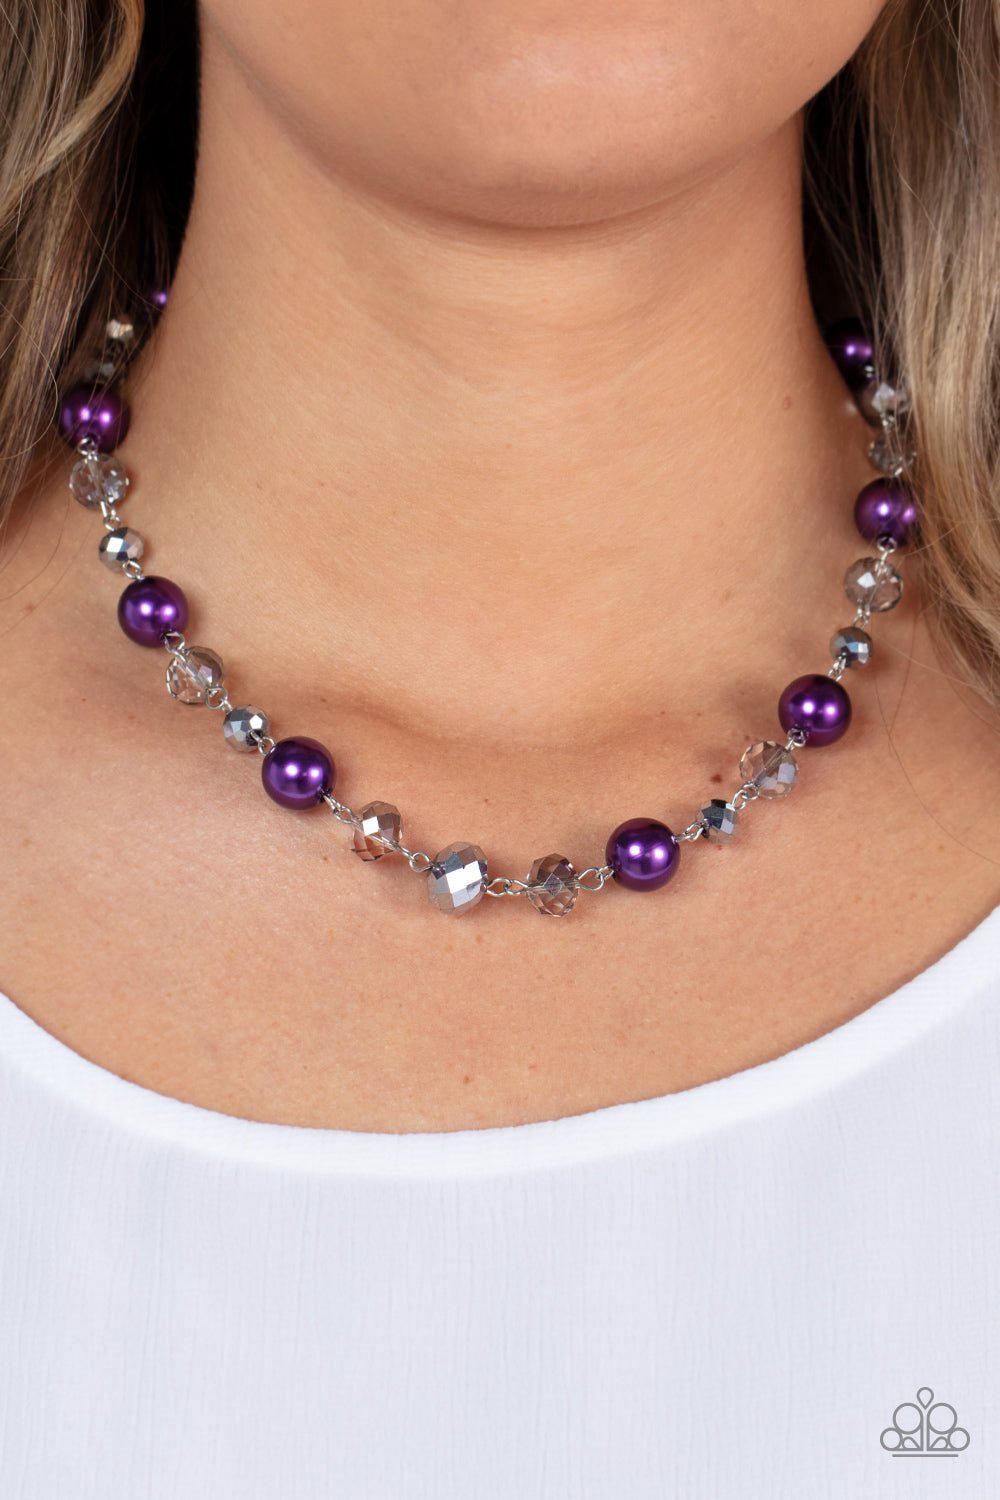 Decked Out Dazzle Purple Necklace - Paparazzi Accessories  A glamorous collection of oversized pearly purple beads, metallic-flecked and smoky crystal-like beads delicately link below the collar, resulting in a glitzy pop of color. Features an adjustable clasp closure.  Sold as one individual necklace. Includes one pair of matching earrings.